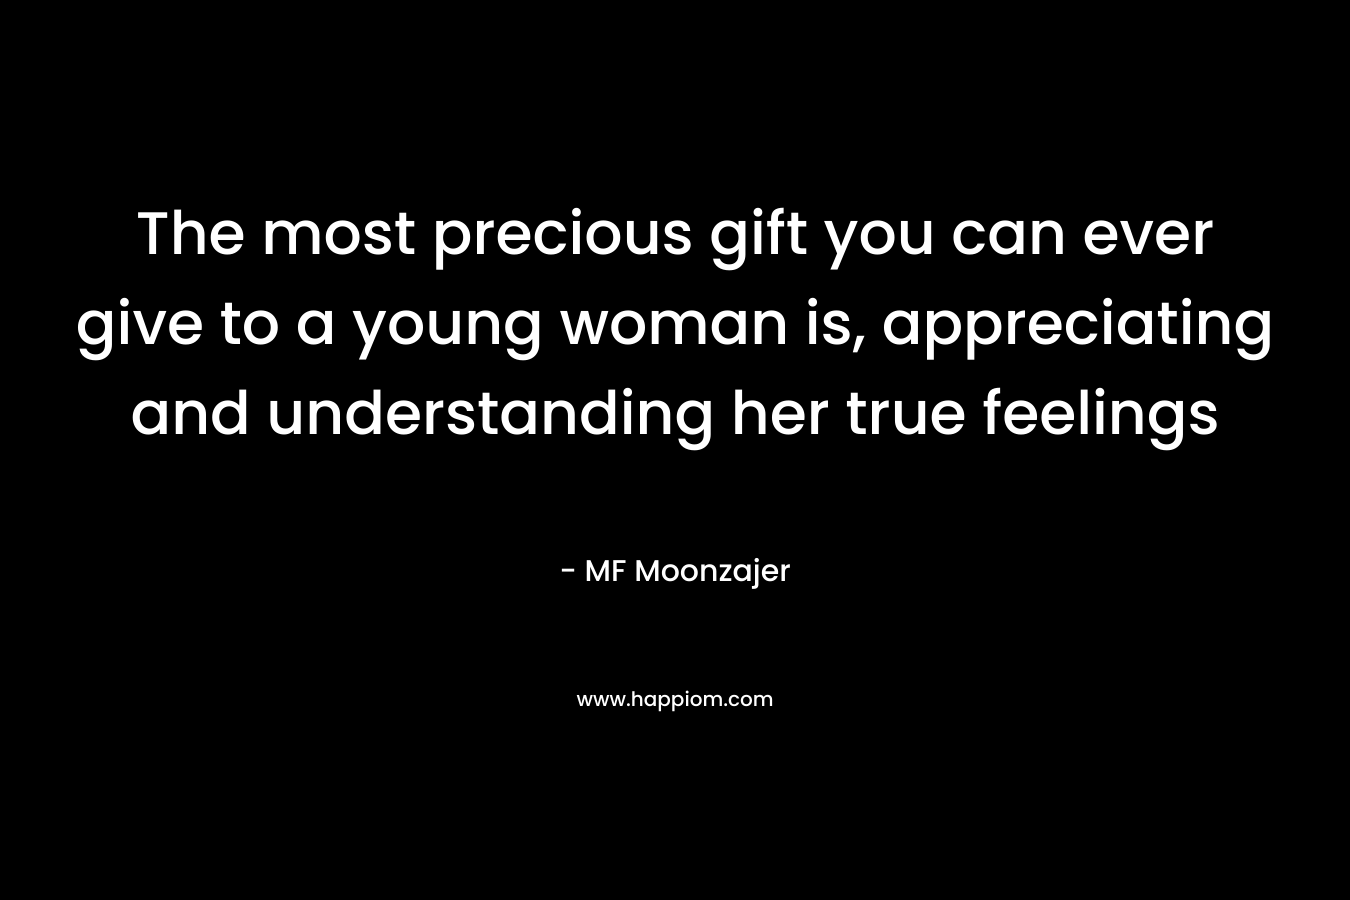 The most precious gift you can ever give to a young woman is, appreciating and understanding her true feelings